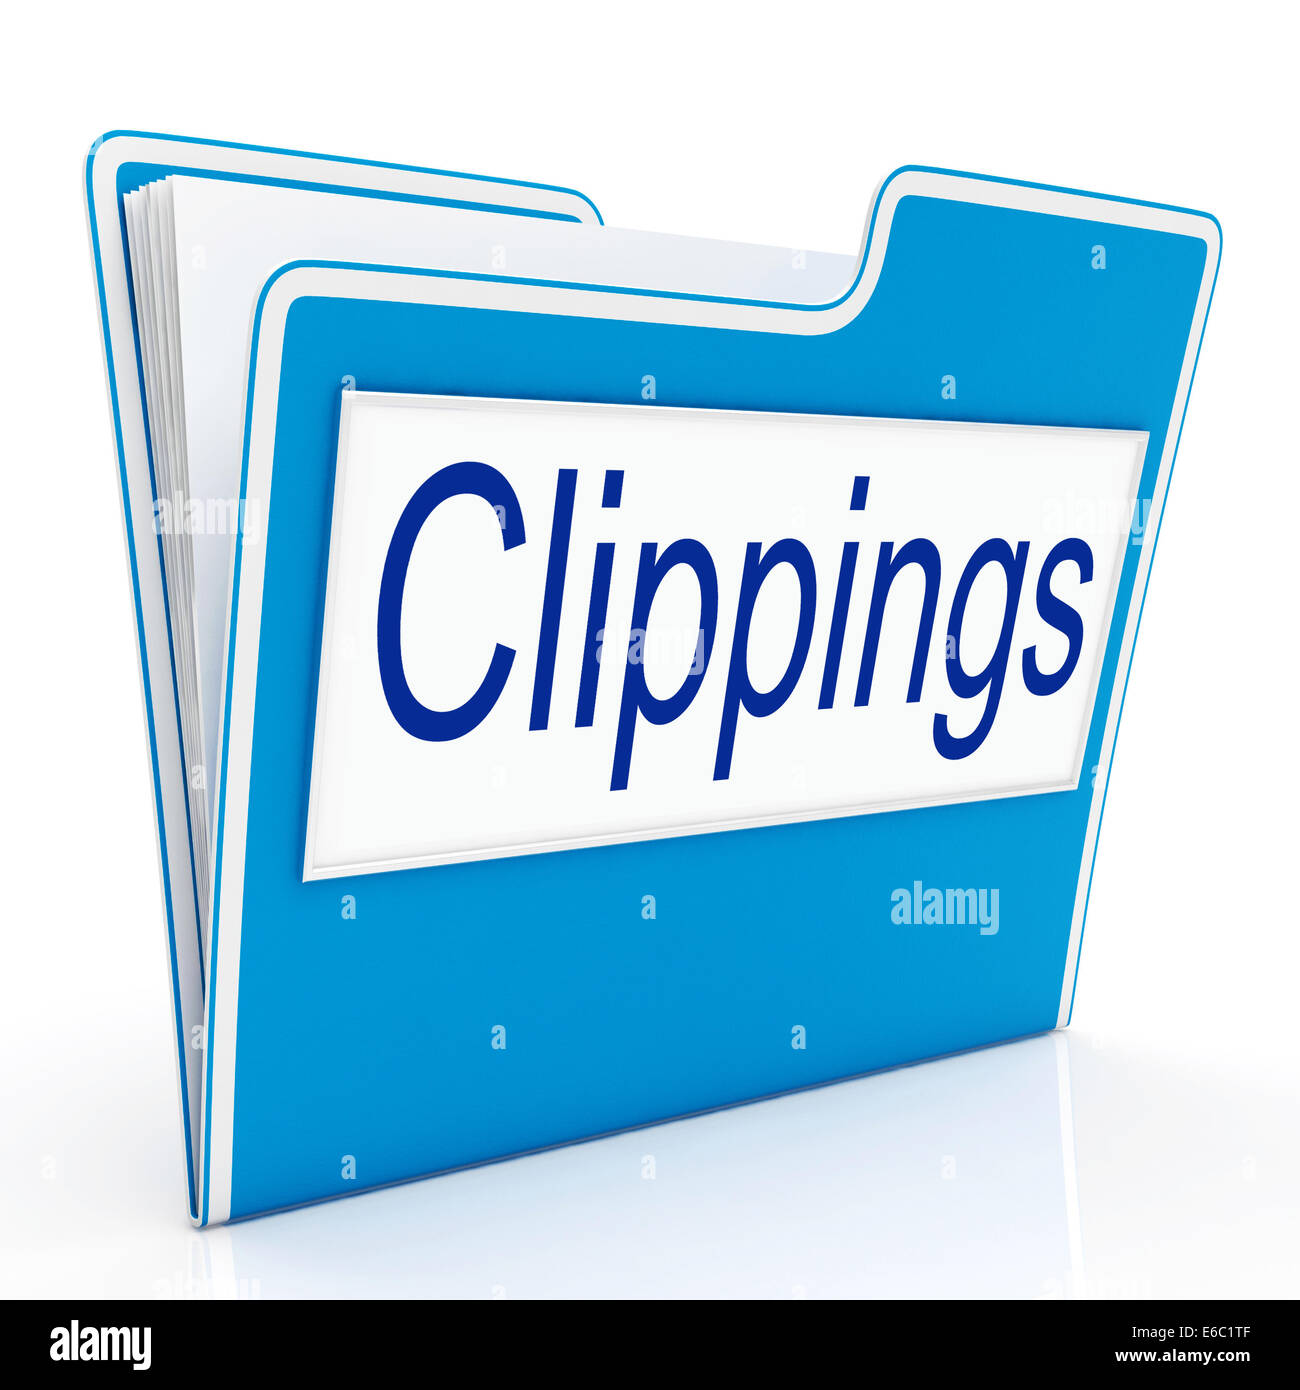 Clippings File Showing Administration Cutting And Paper Stock Photo